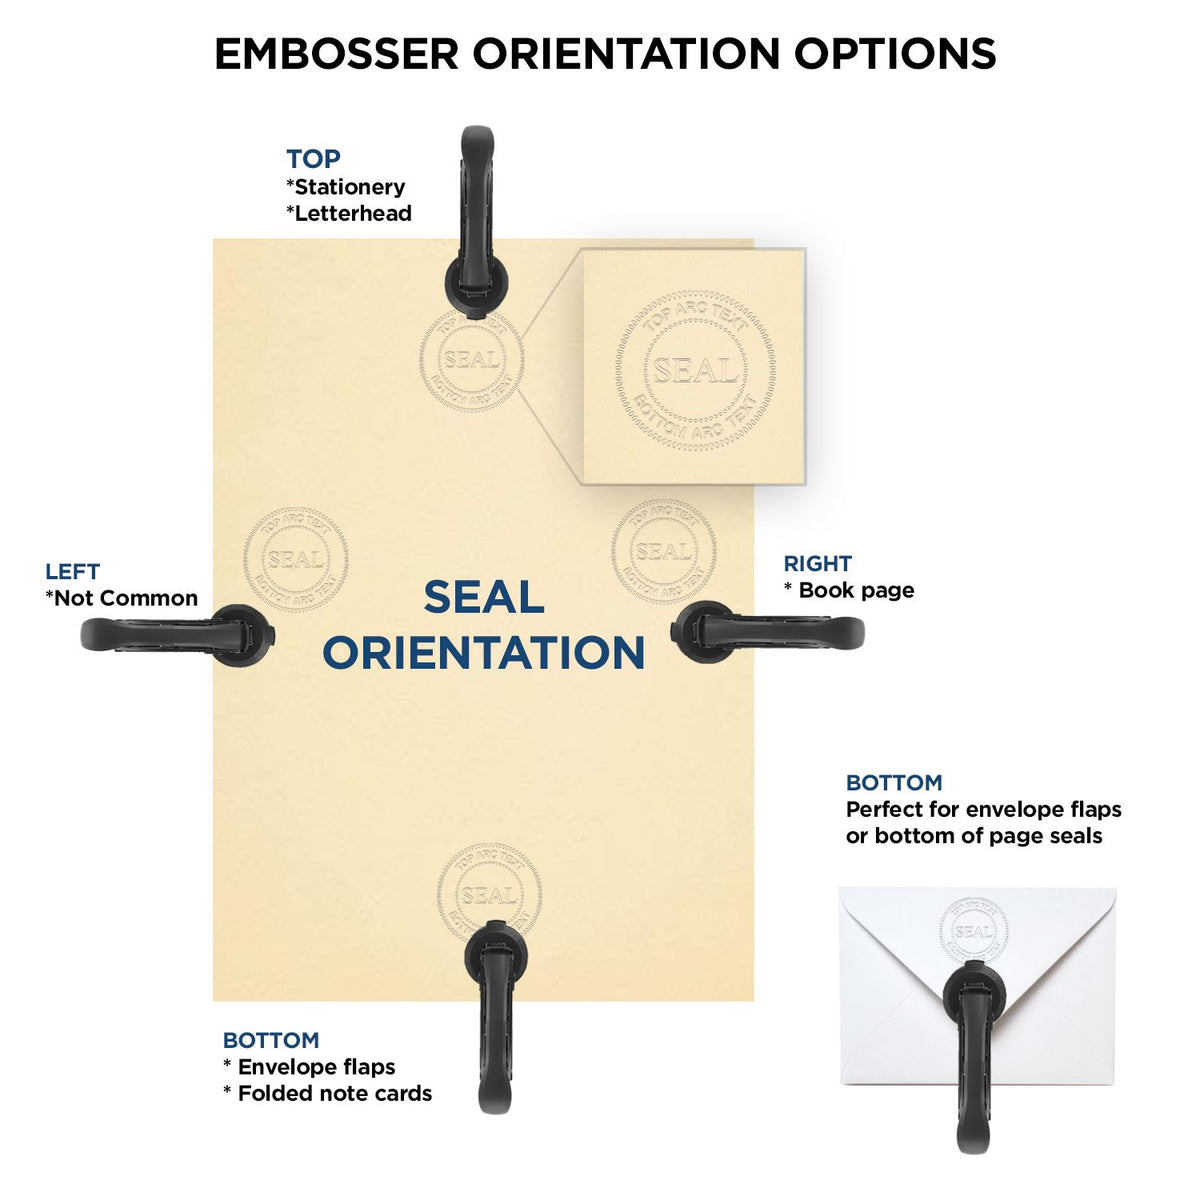 An infographic for the Heavy Duty Cast Iron Illinois Engineer Seal Embosser showing embosser orientation, this is showing examples of a top, bottom, right and left insert.